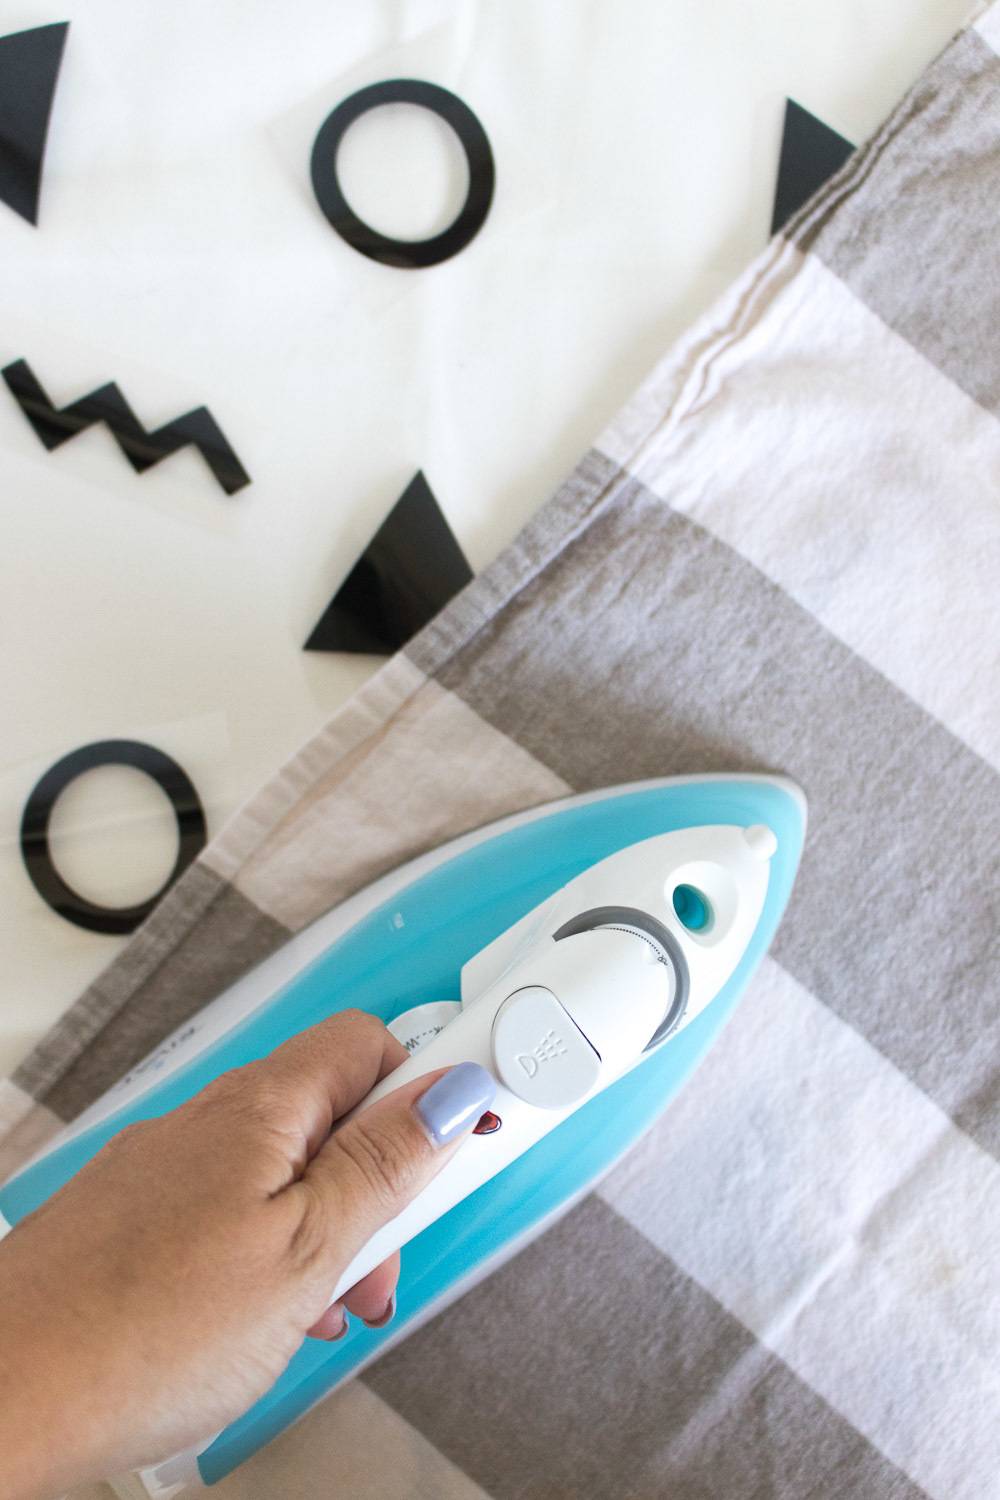 A person is using a blue and white iron to iron a piece of clothing.